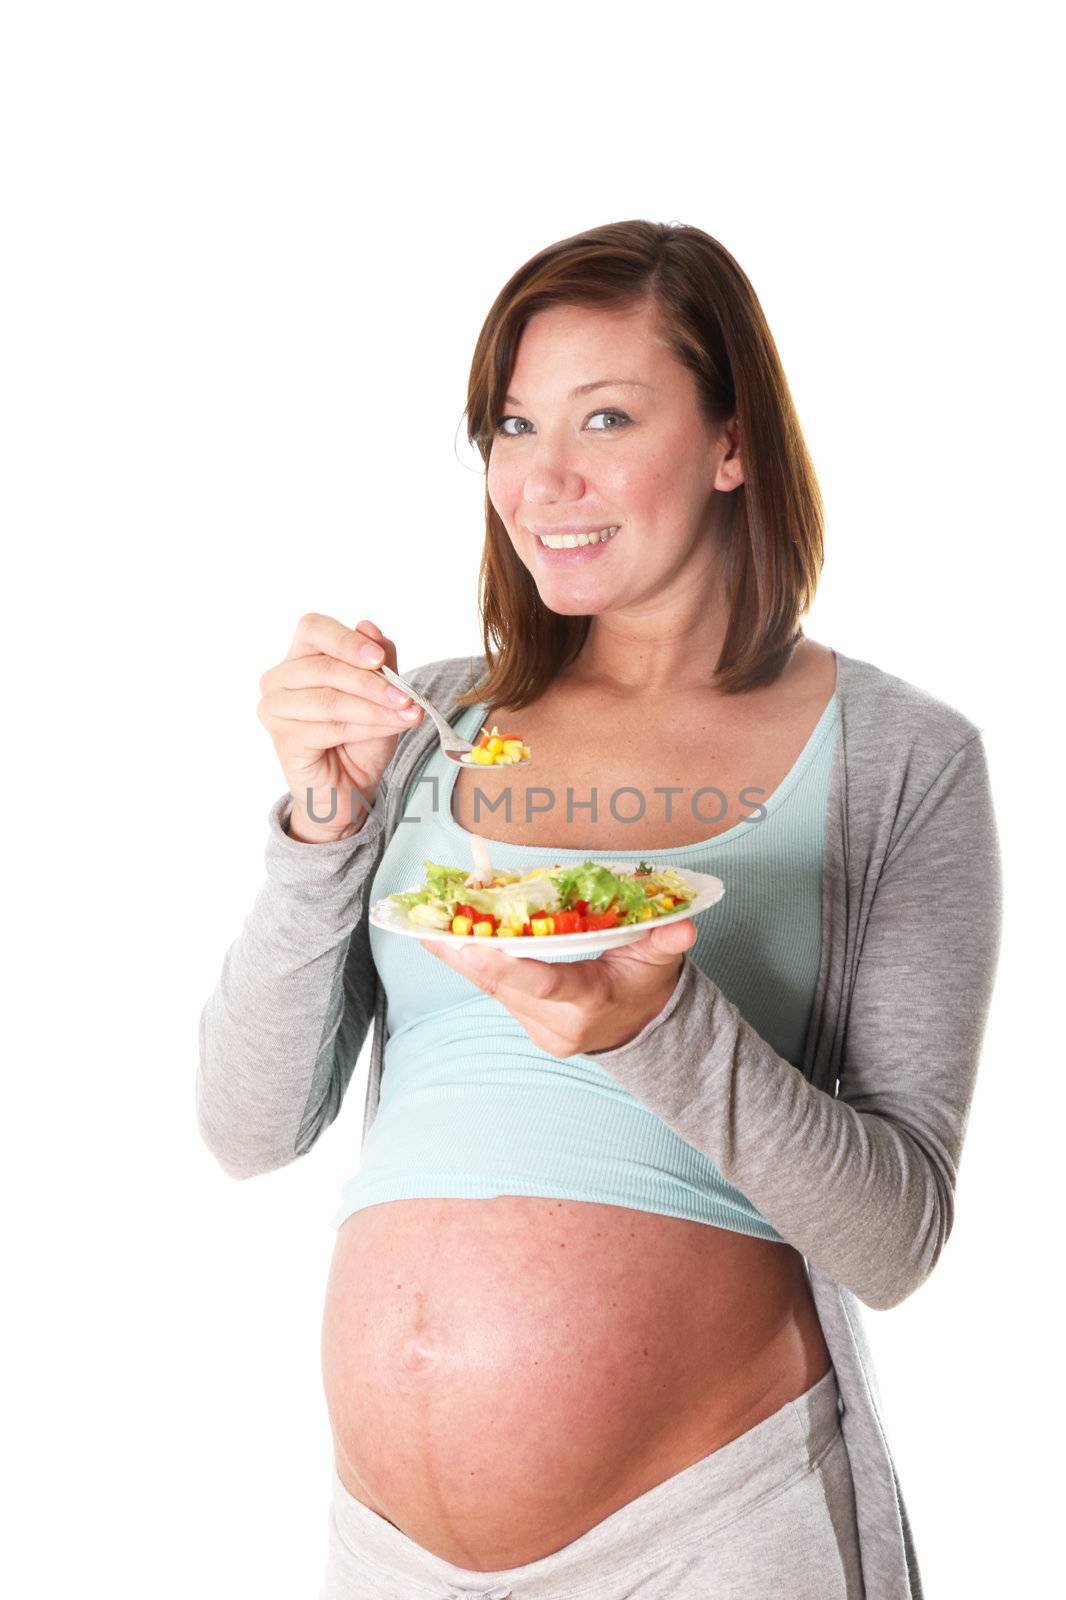 Pregnant women eat healthily by Farina6000